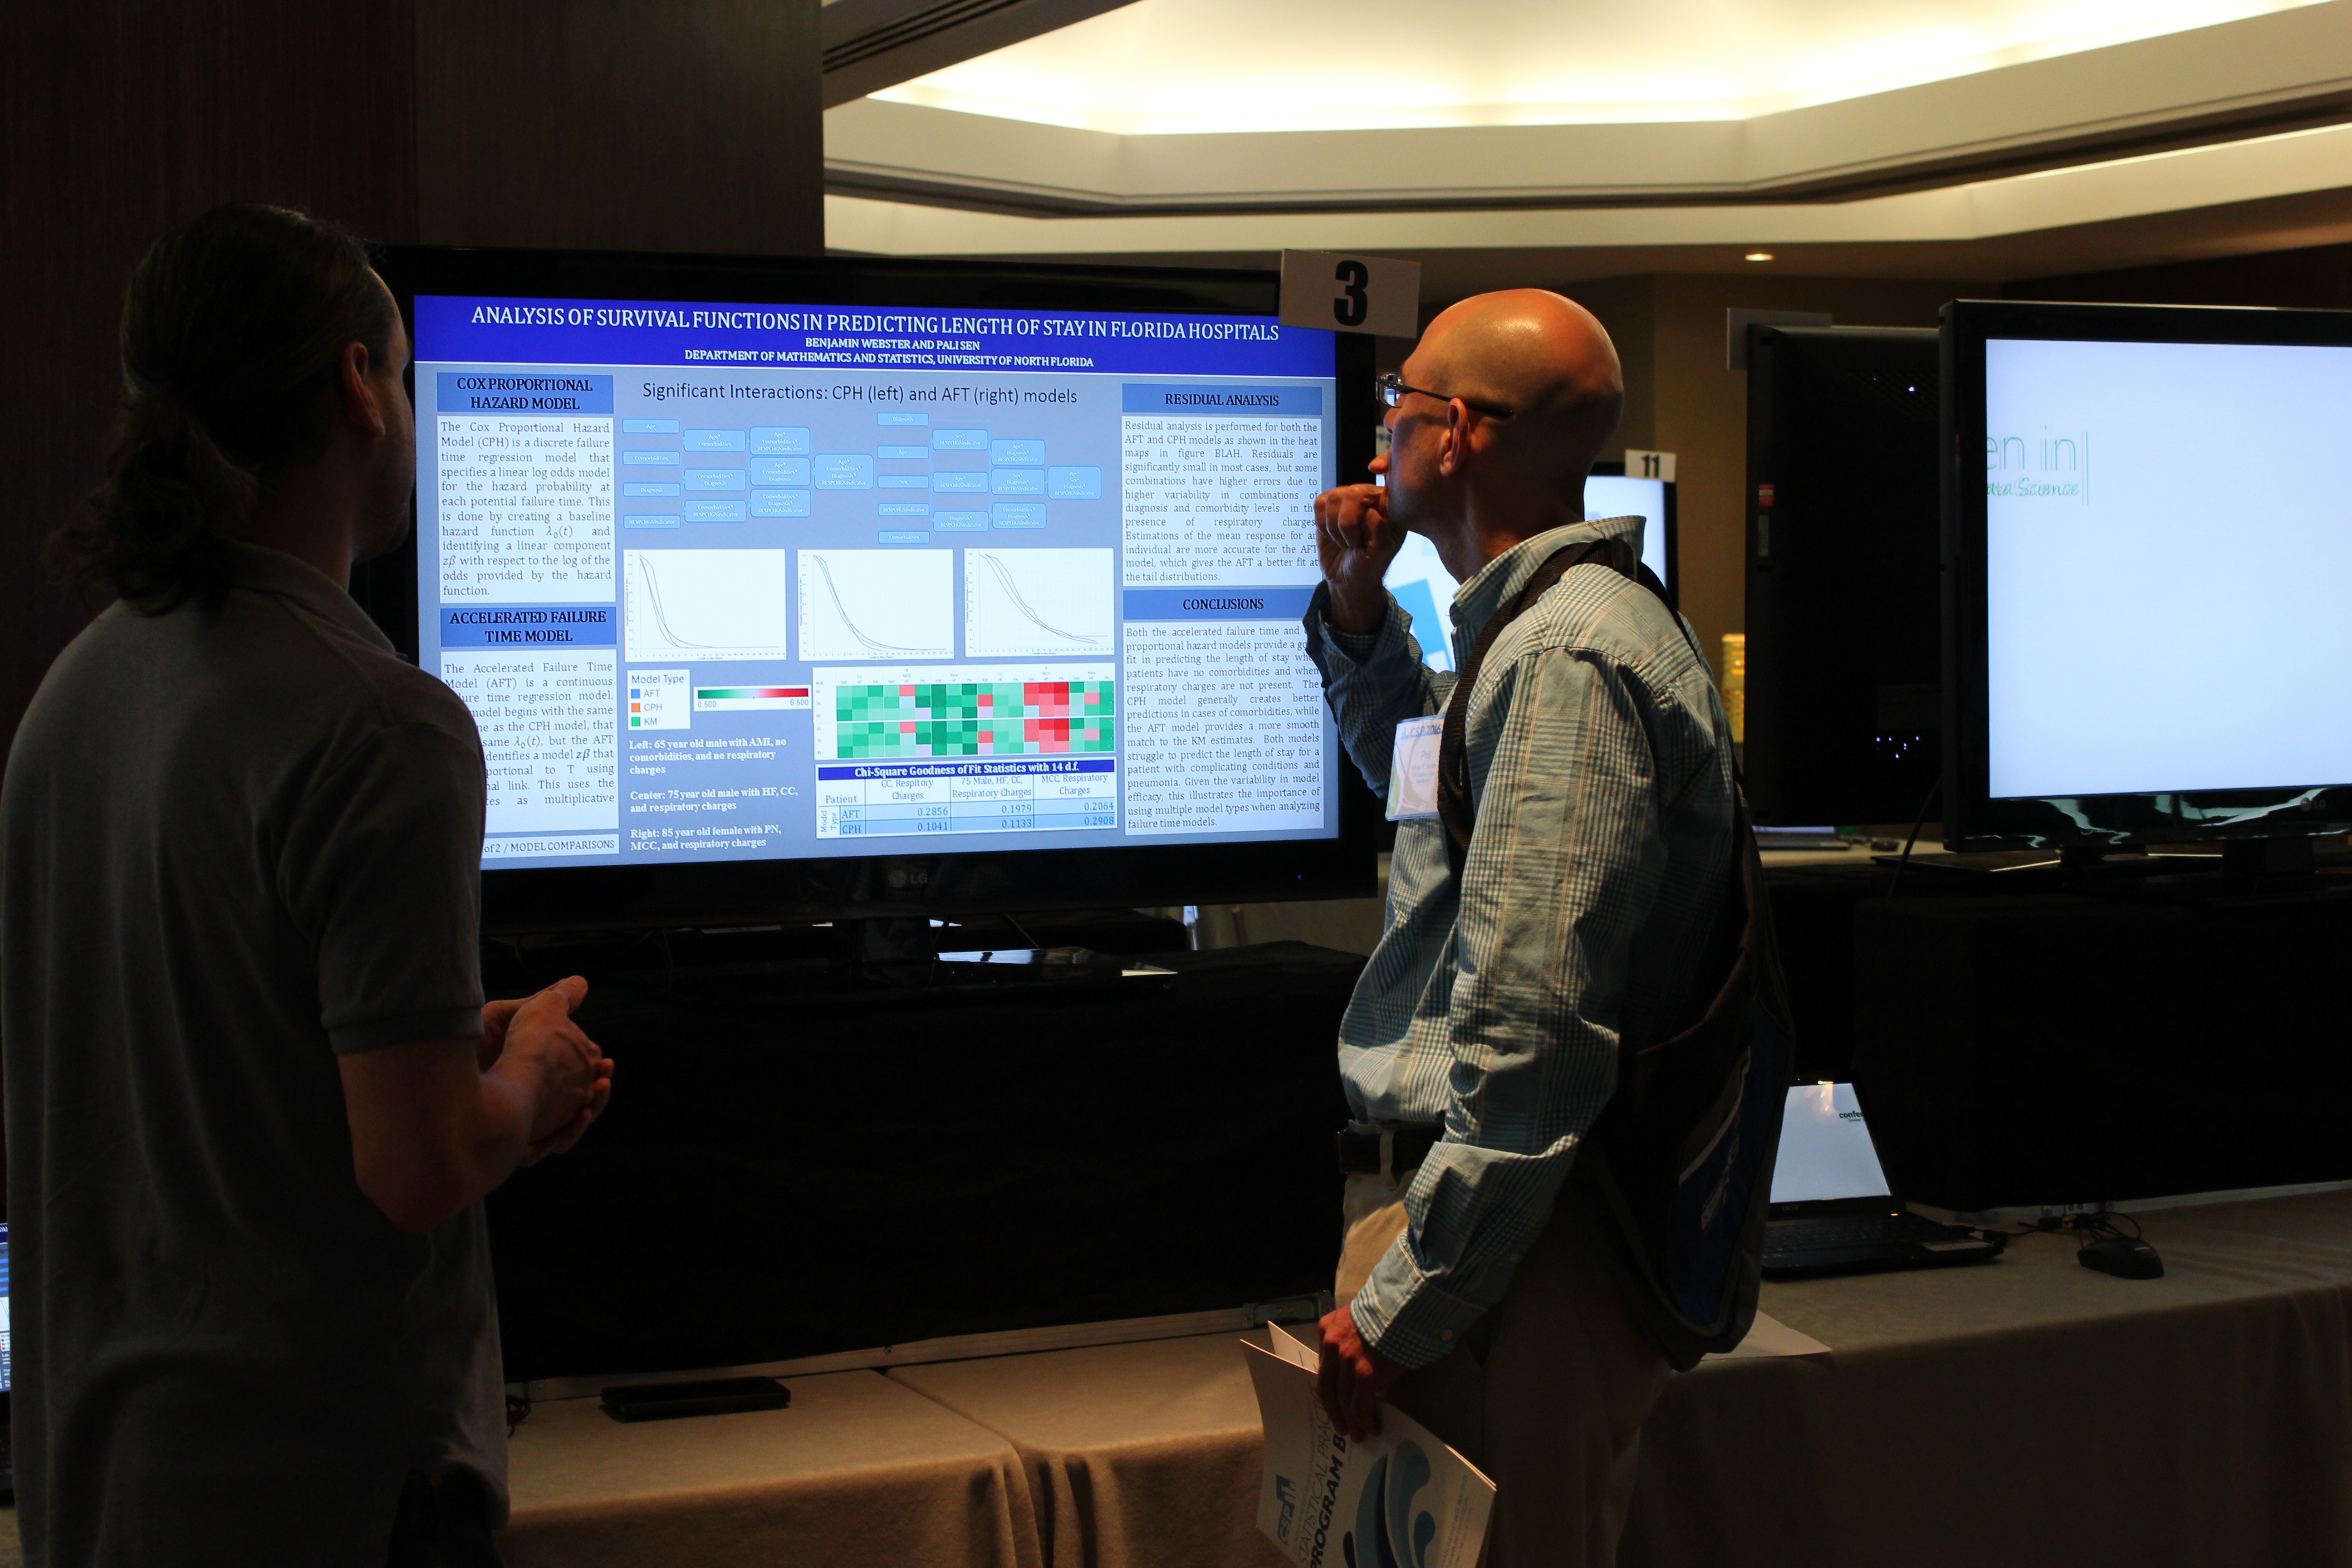 Attendees examine Benjamin Ray Webster's poster, titled "Analysis of Survival Functions in Predicting Length of Stay in Florida Hospitals," during the opening mixer and poster session.